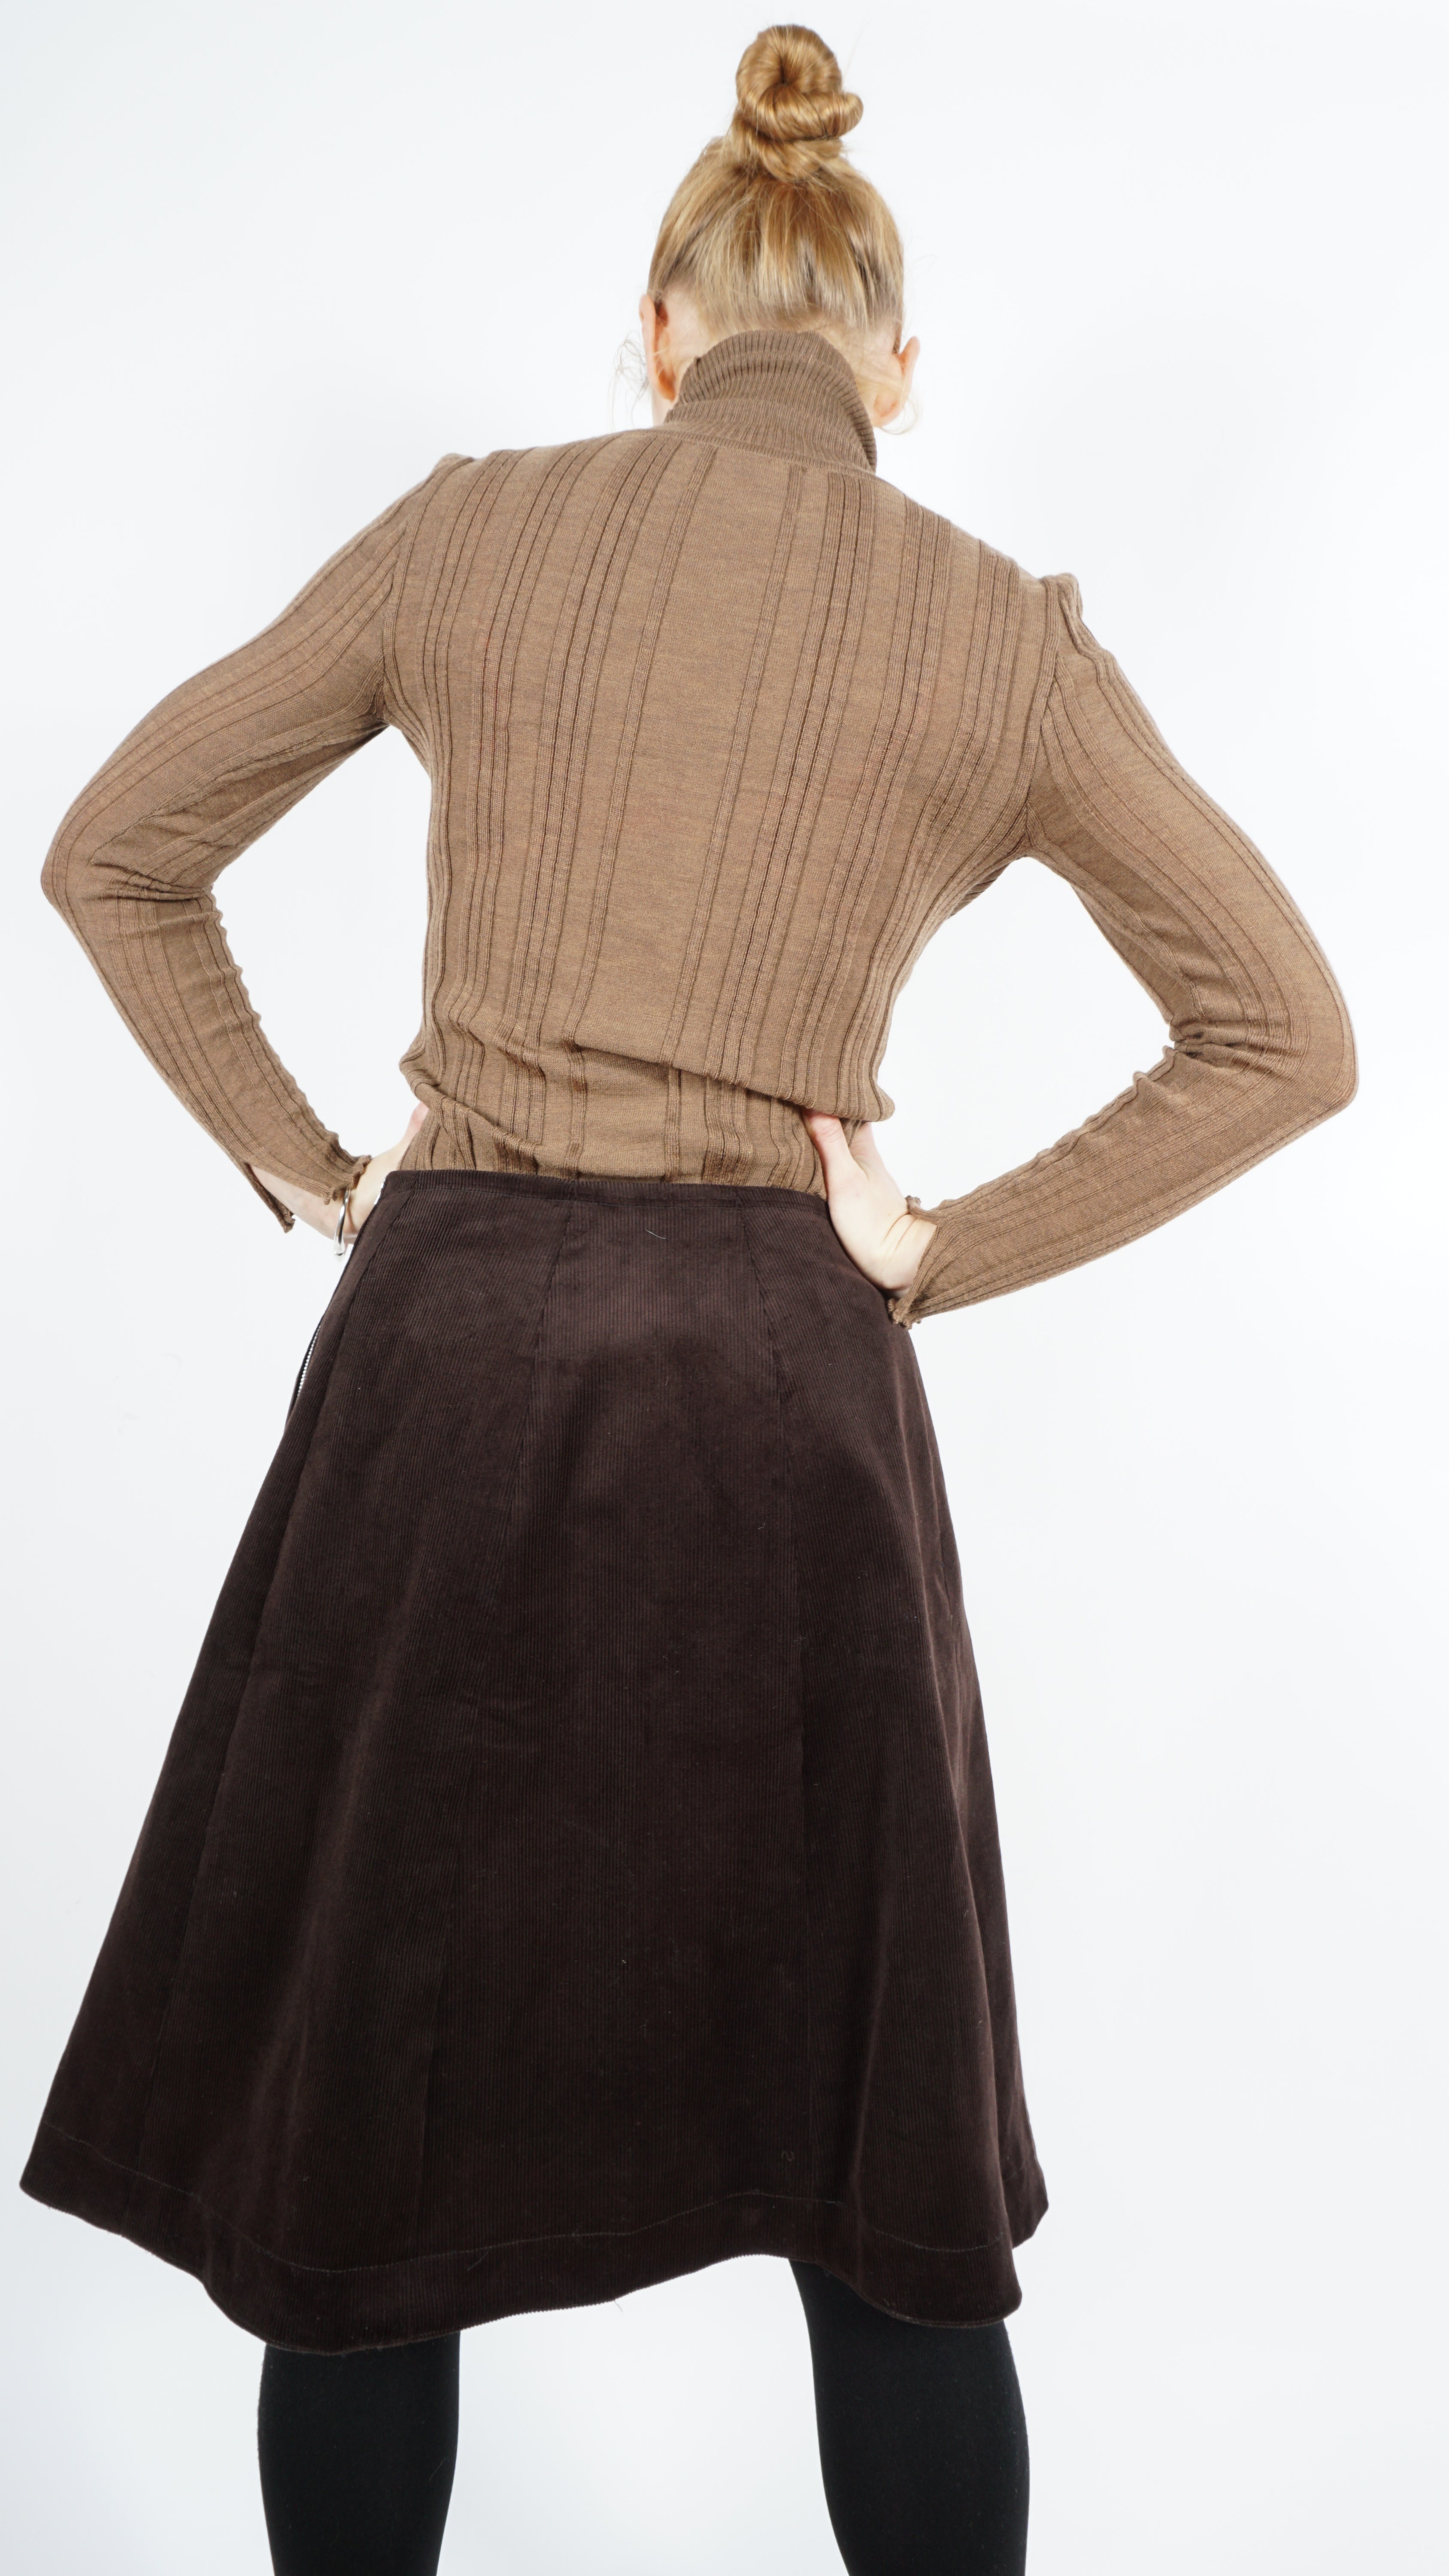 A-skirt corduroy skirt by Maria Holm